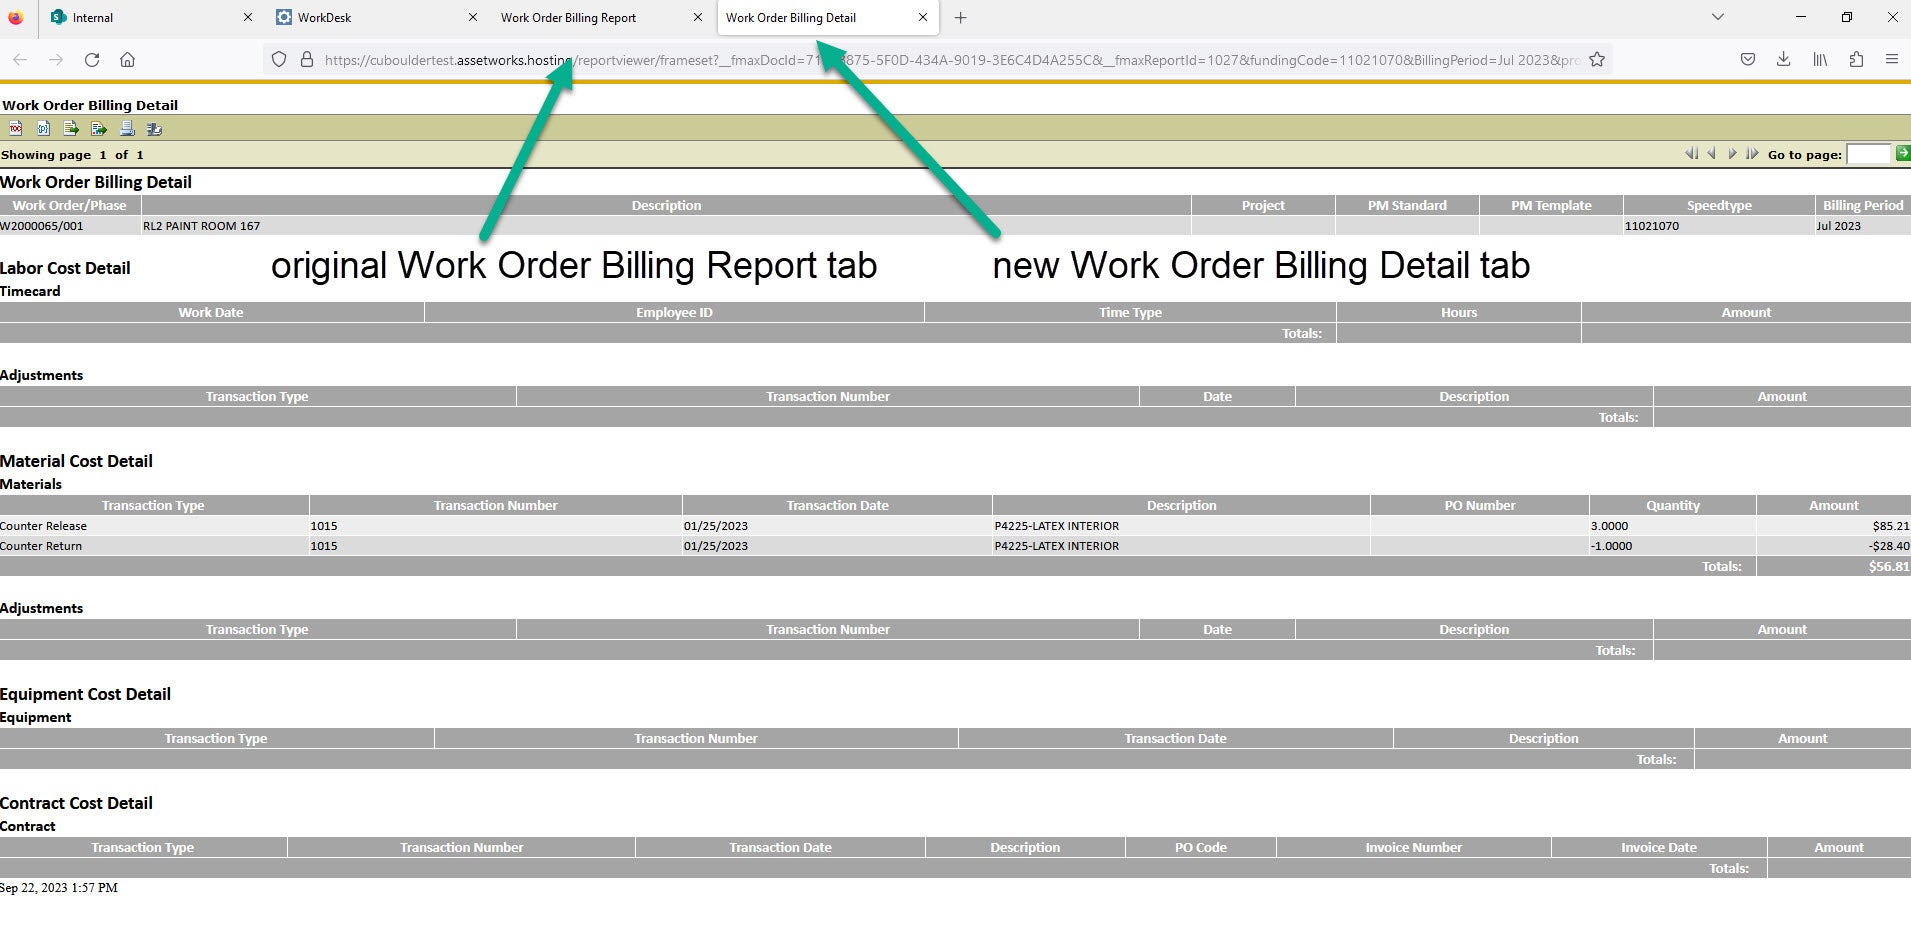 work order billing detail in a new tab